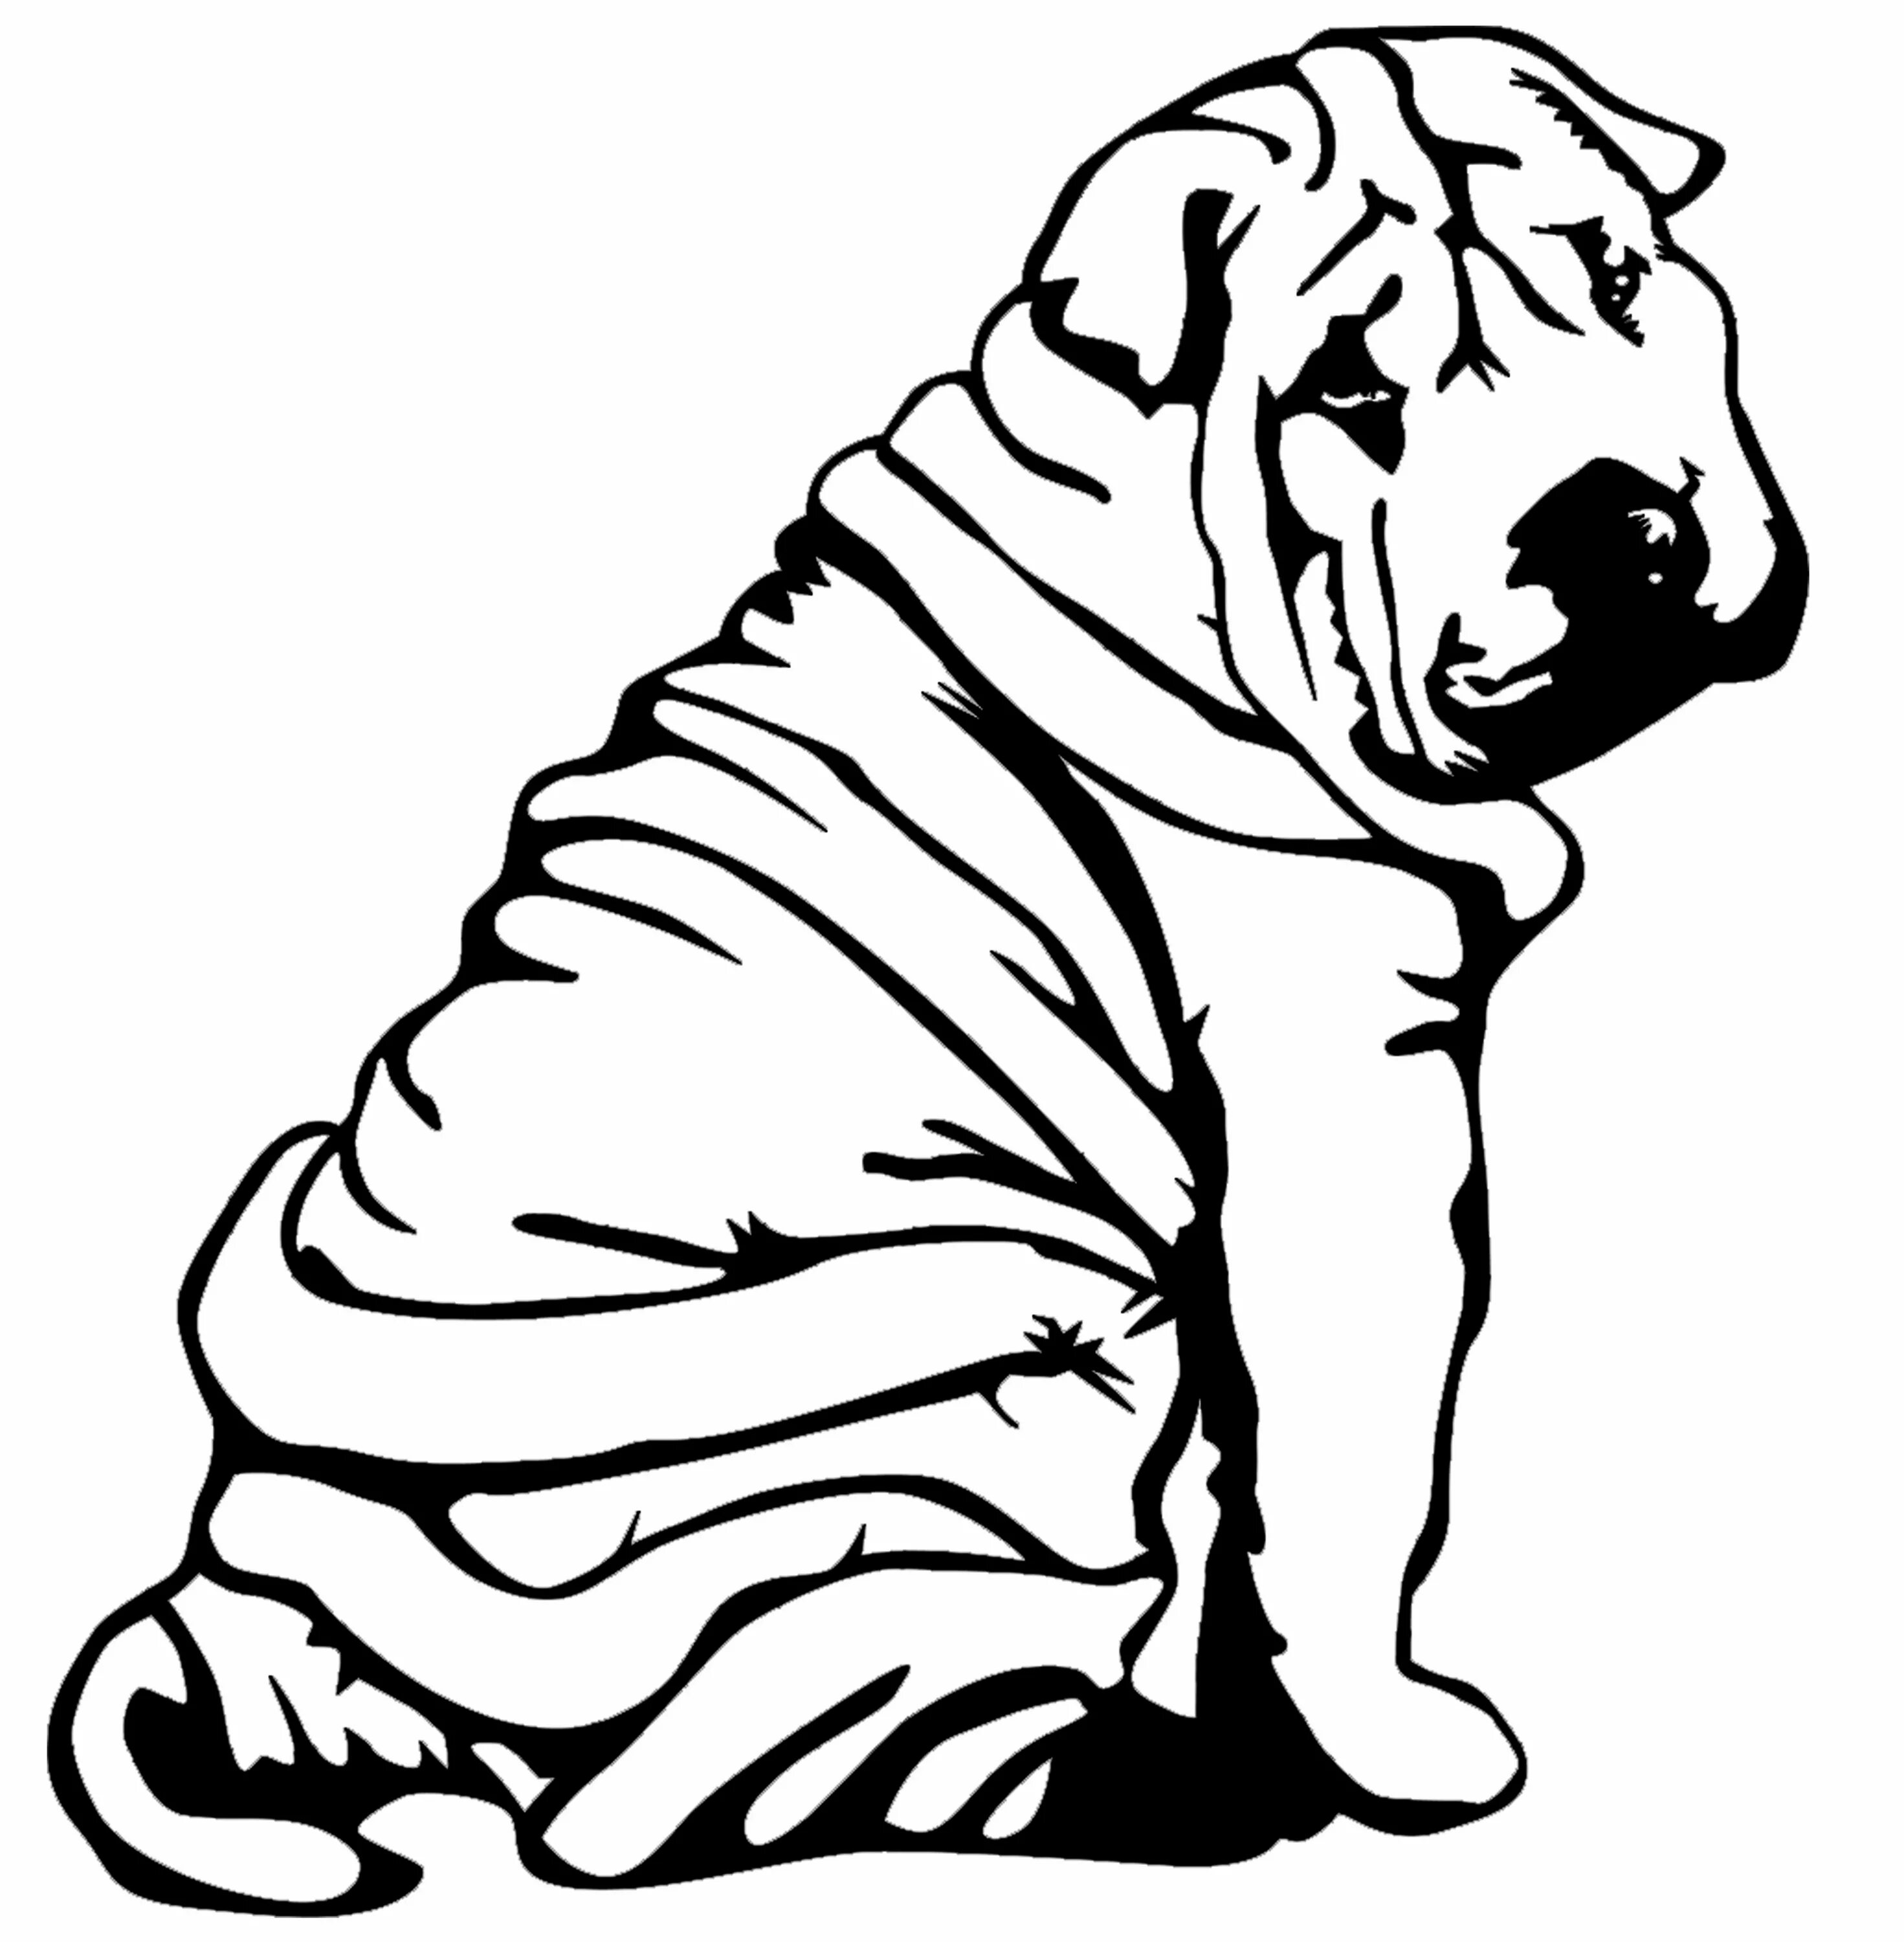 Chipper Shar Pei coloring page